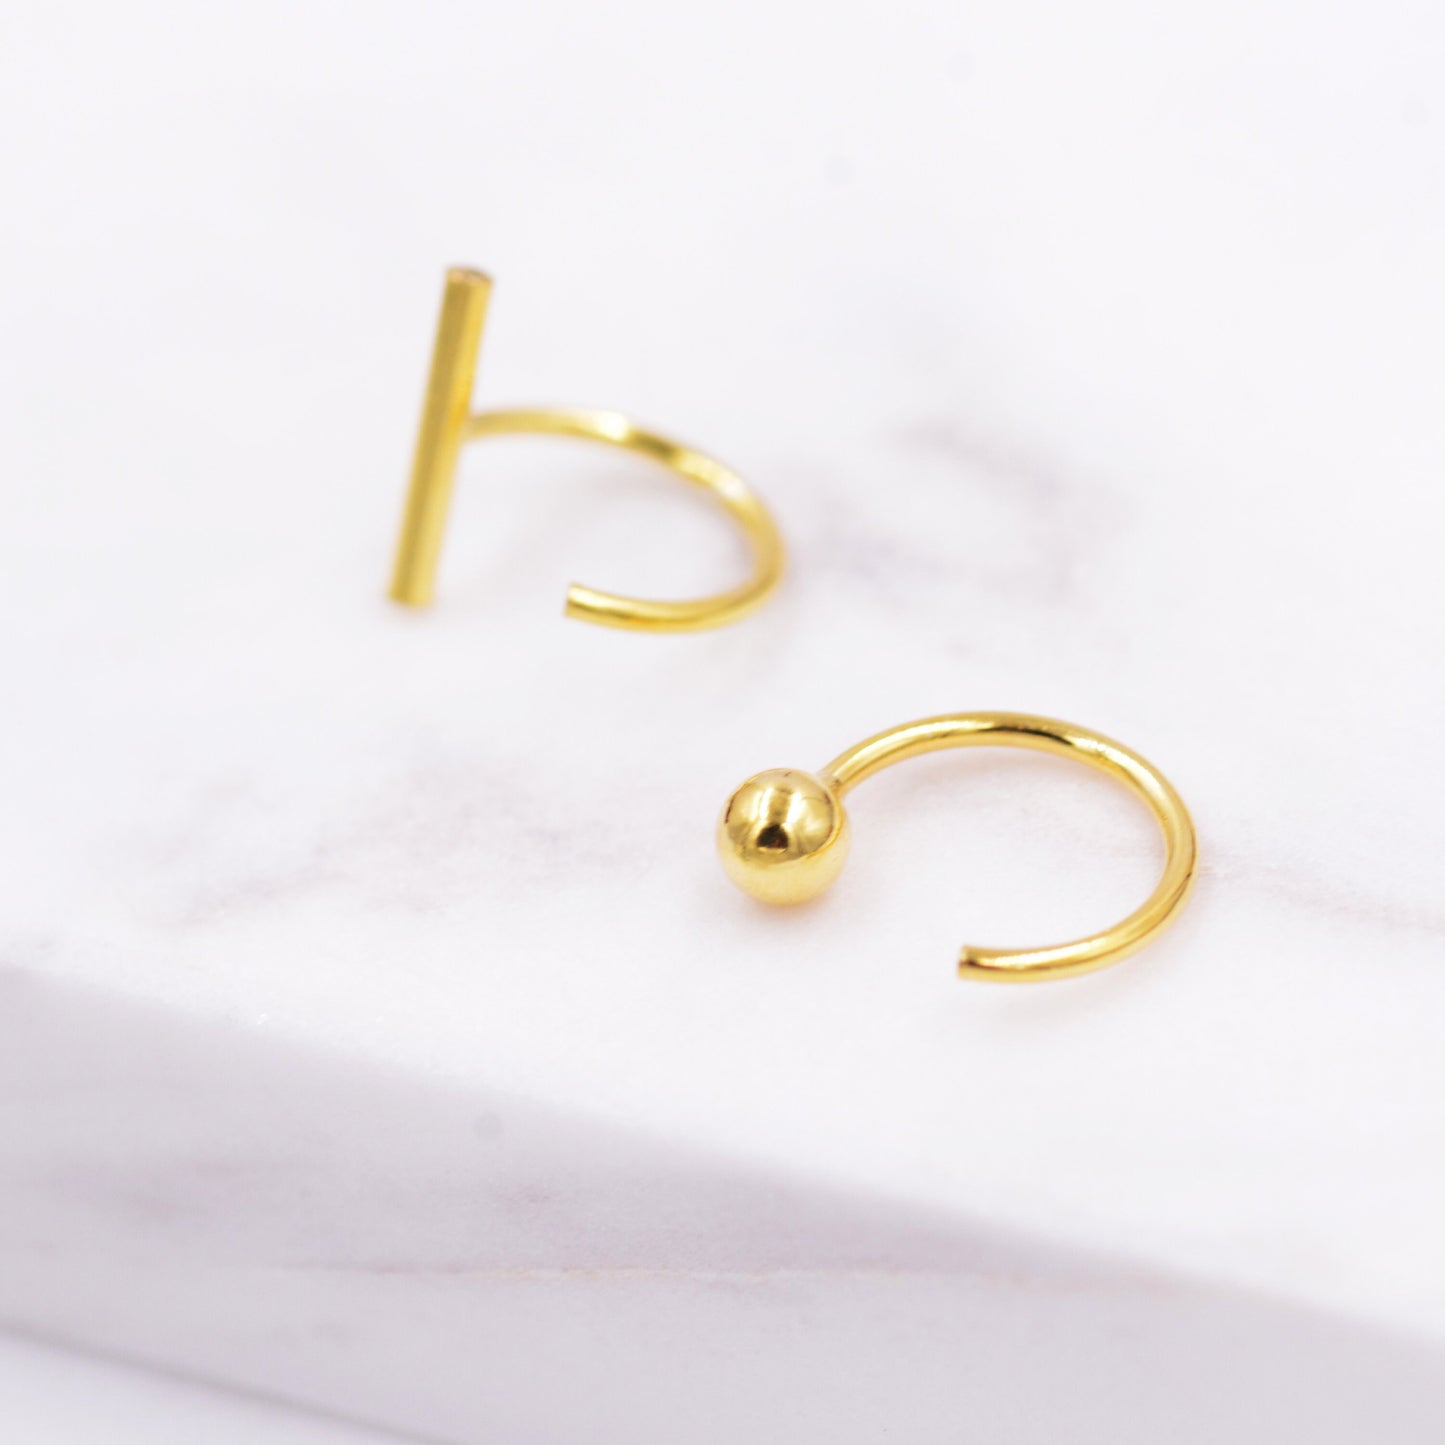 Mismatched Ball and Bar Huggie Hoop Threader Earrings in Sterling Silver, Silver or Gold, Pull Through Open Hoop Earrings